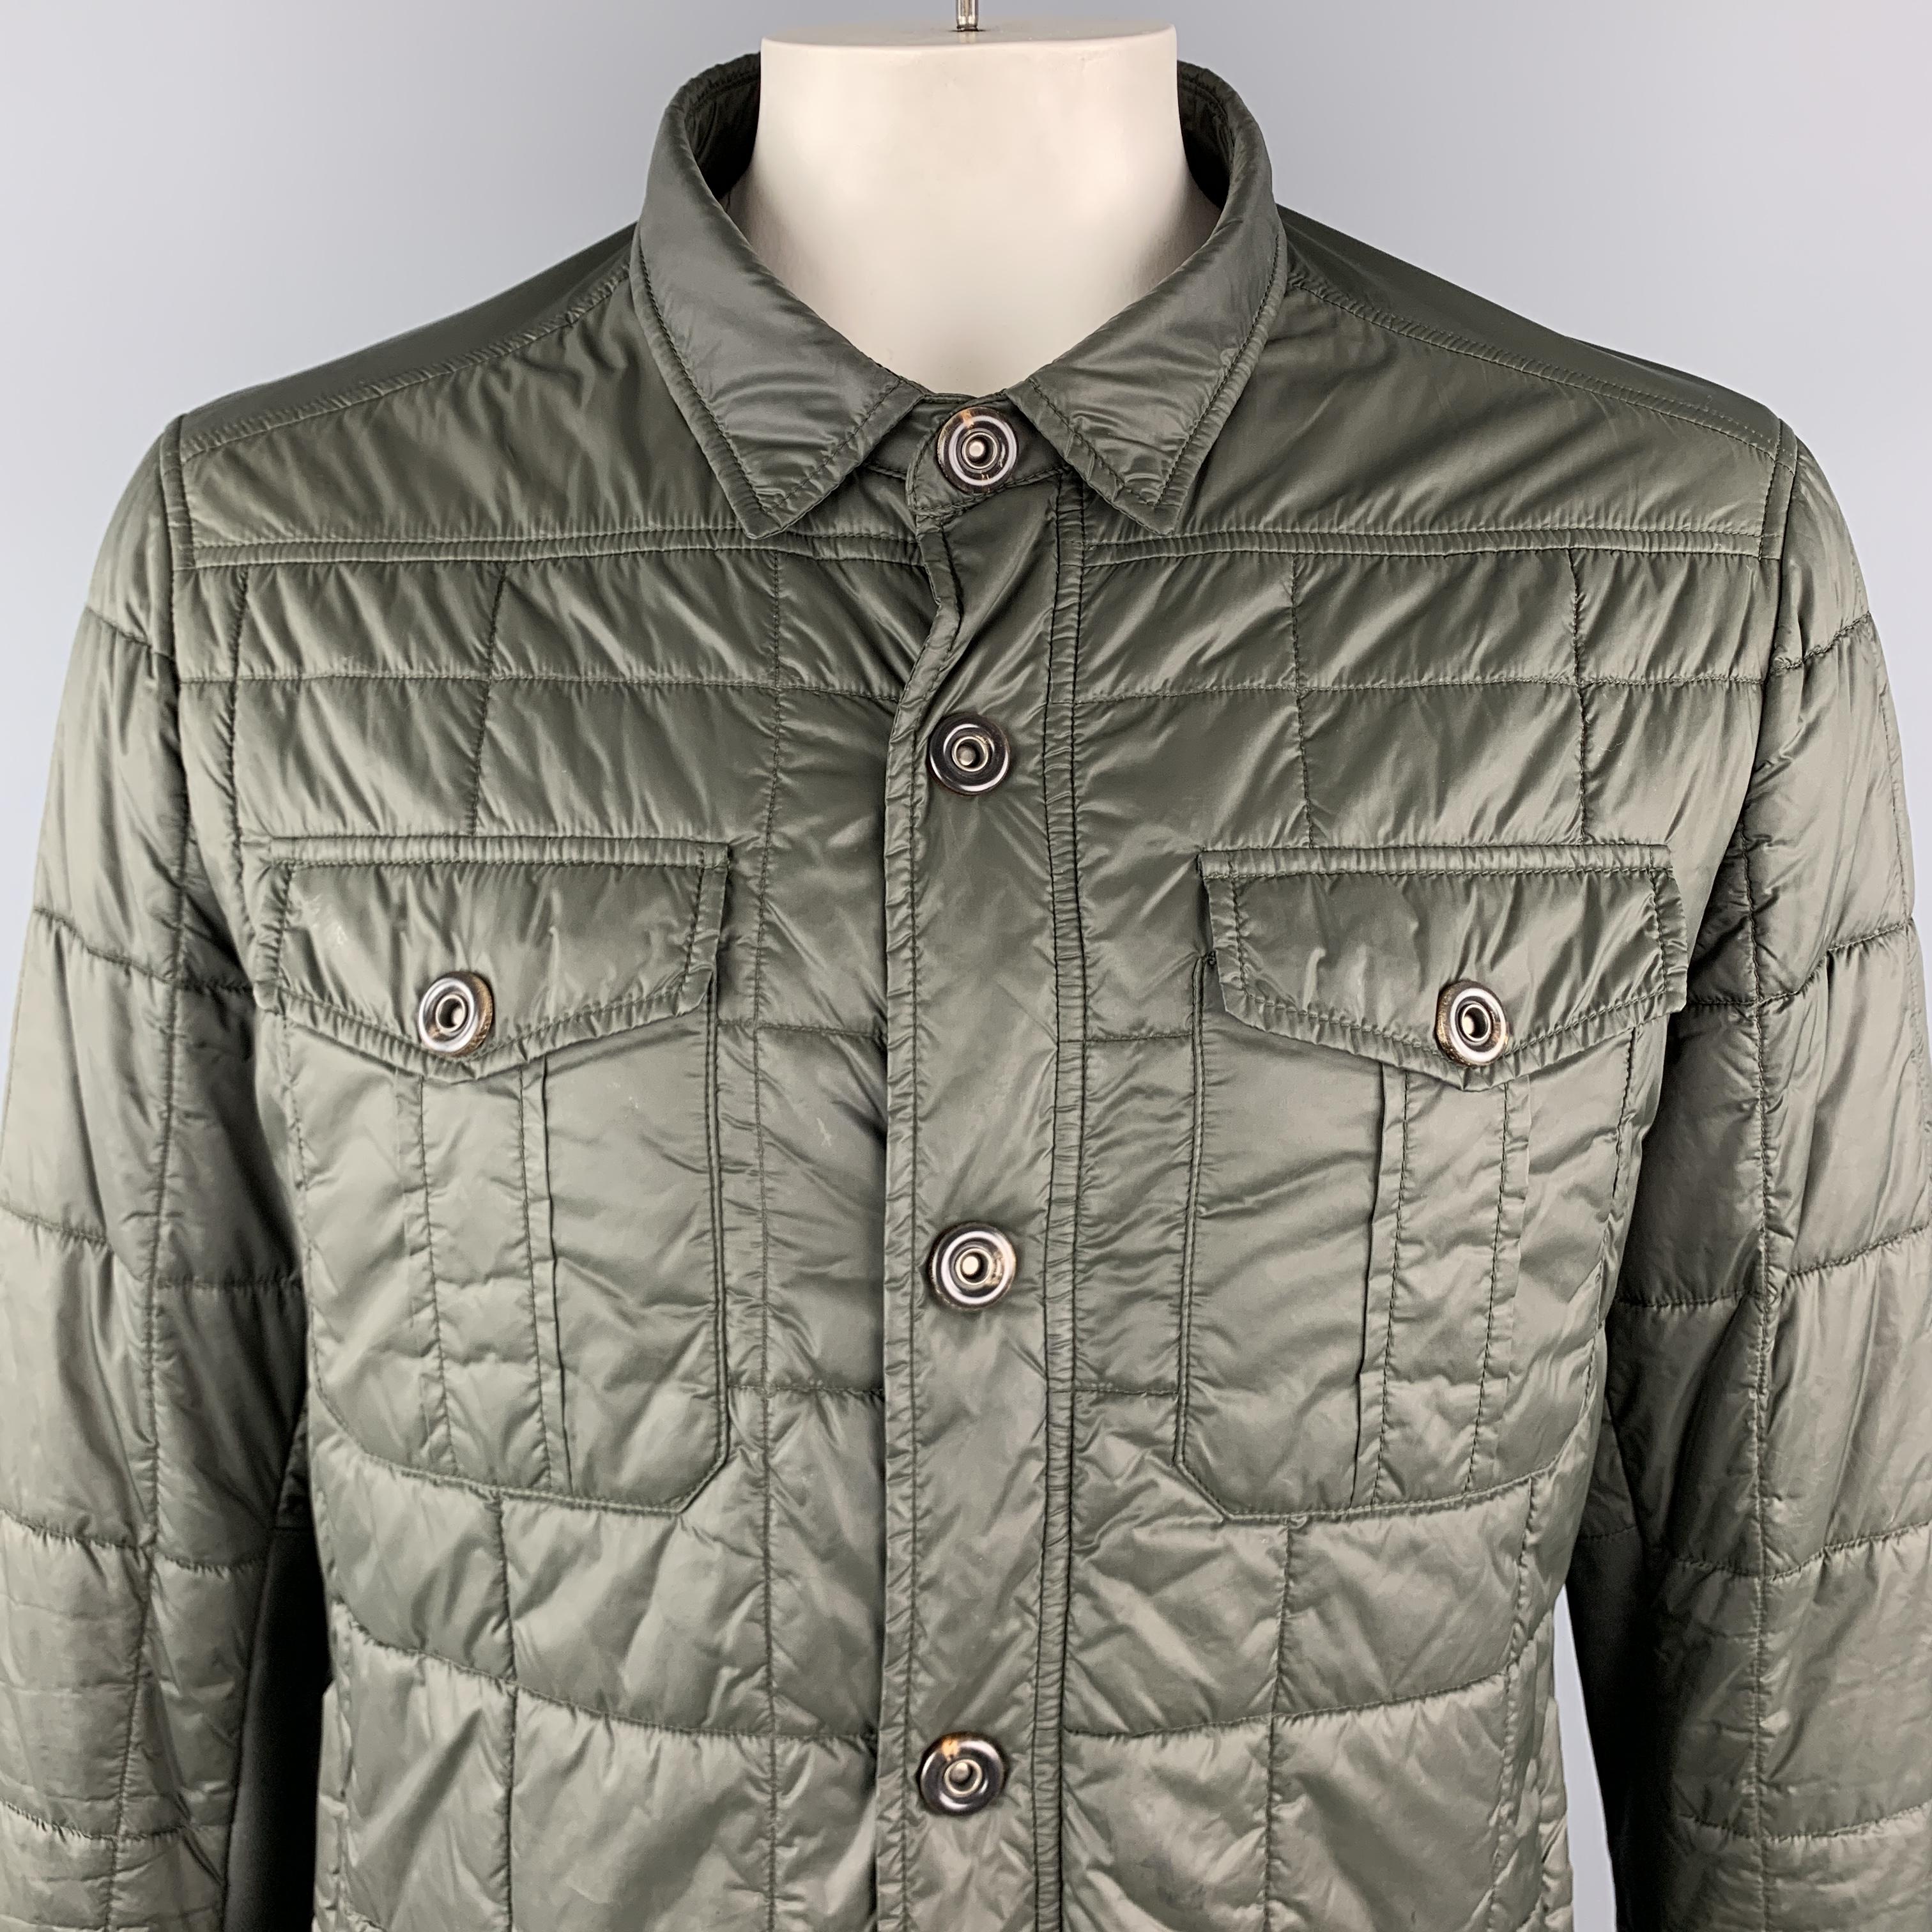 BRUNELLO CUCINELLI  Jacket comes in an olive quilted nylon material, with snaps at closure, cuffs and pockets, zip pockets, leather trim, and elbow patches. Made in Italy.

Excellent Pre-Owned Condition.
Marked: XL

Measurements:

Shoulder: 17 in.